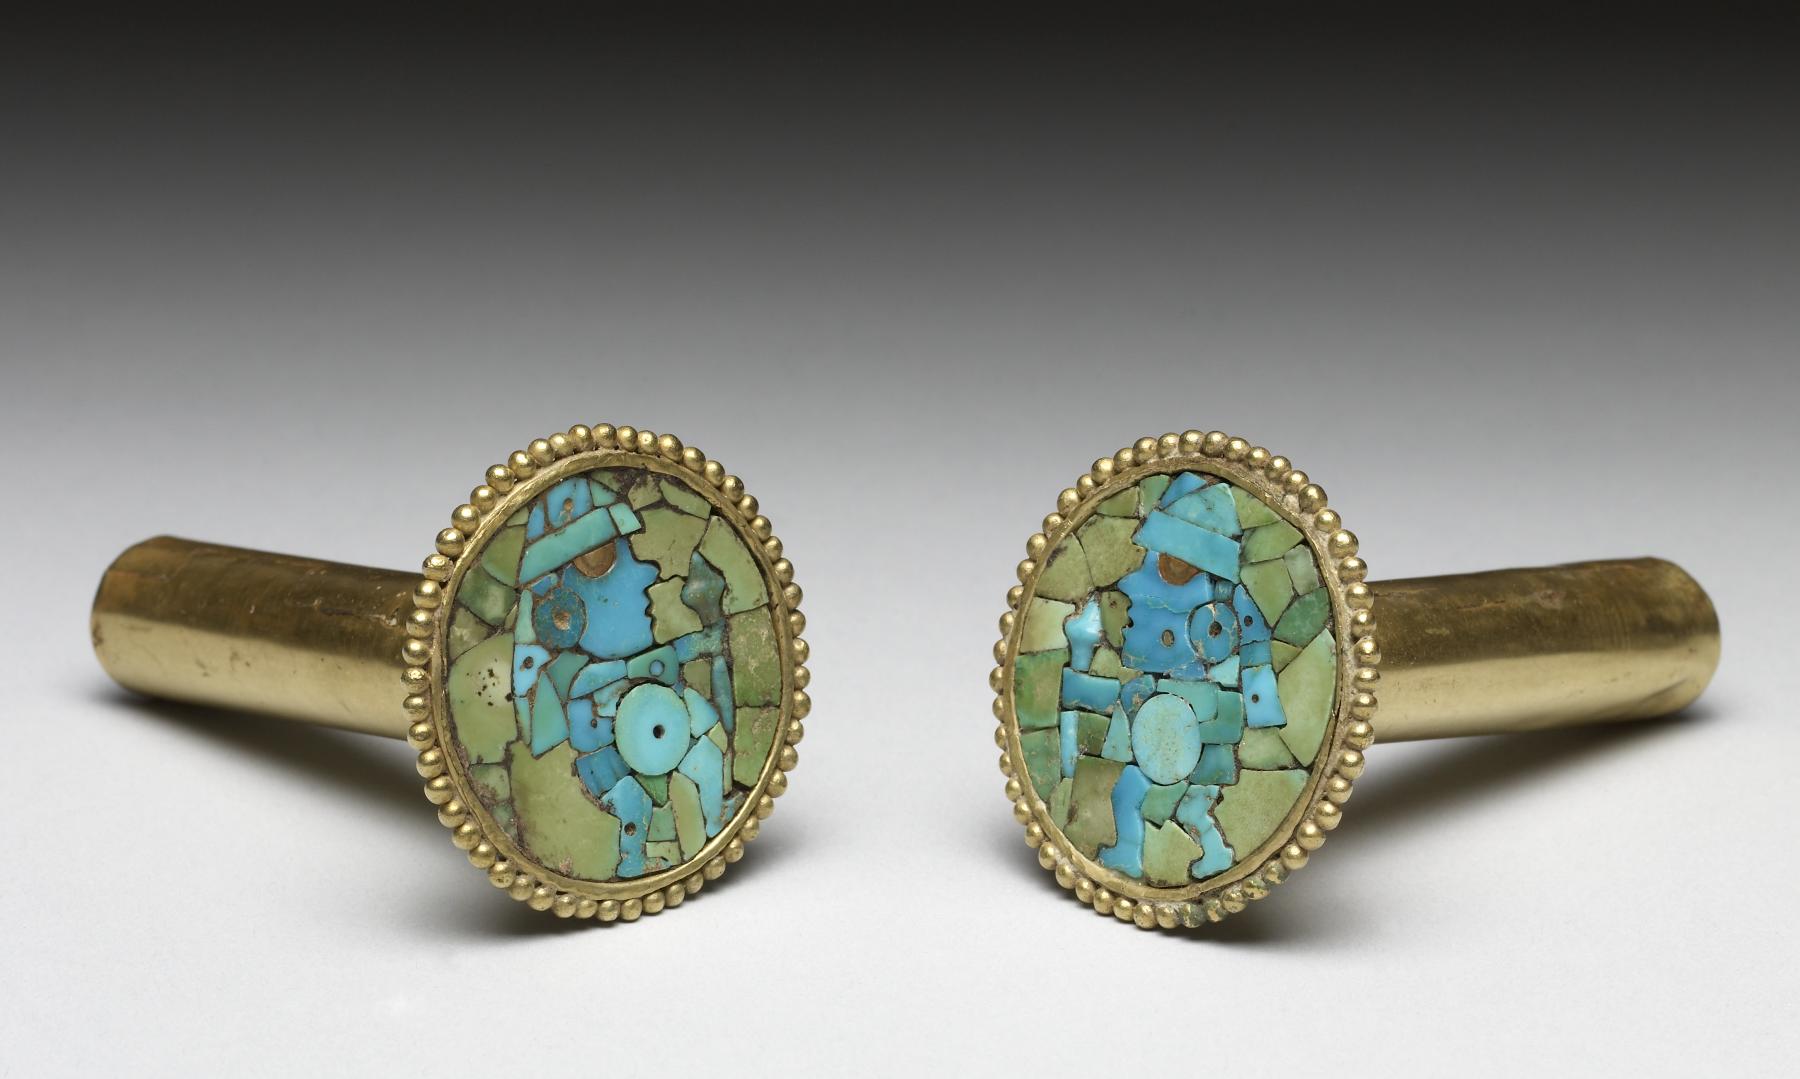 Earflares by Unknown Artist - 400-600 CE - 4 x 6.8 cm Walters Art Museum